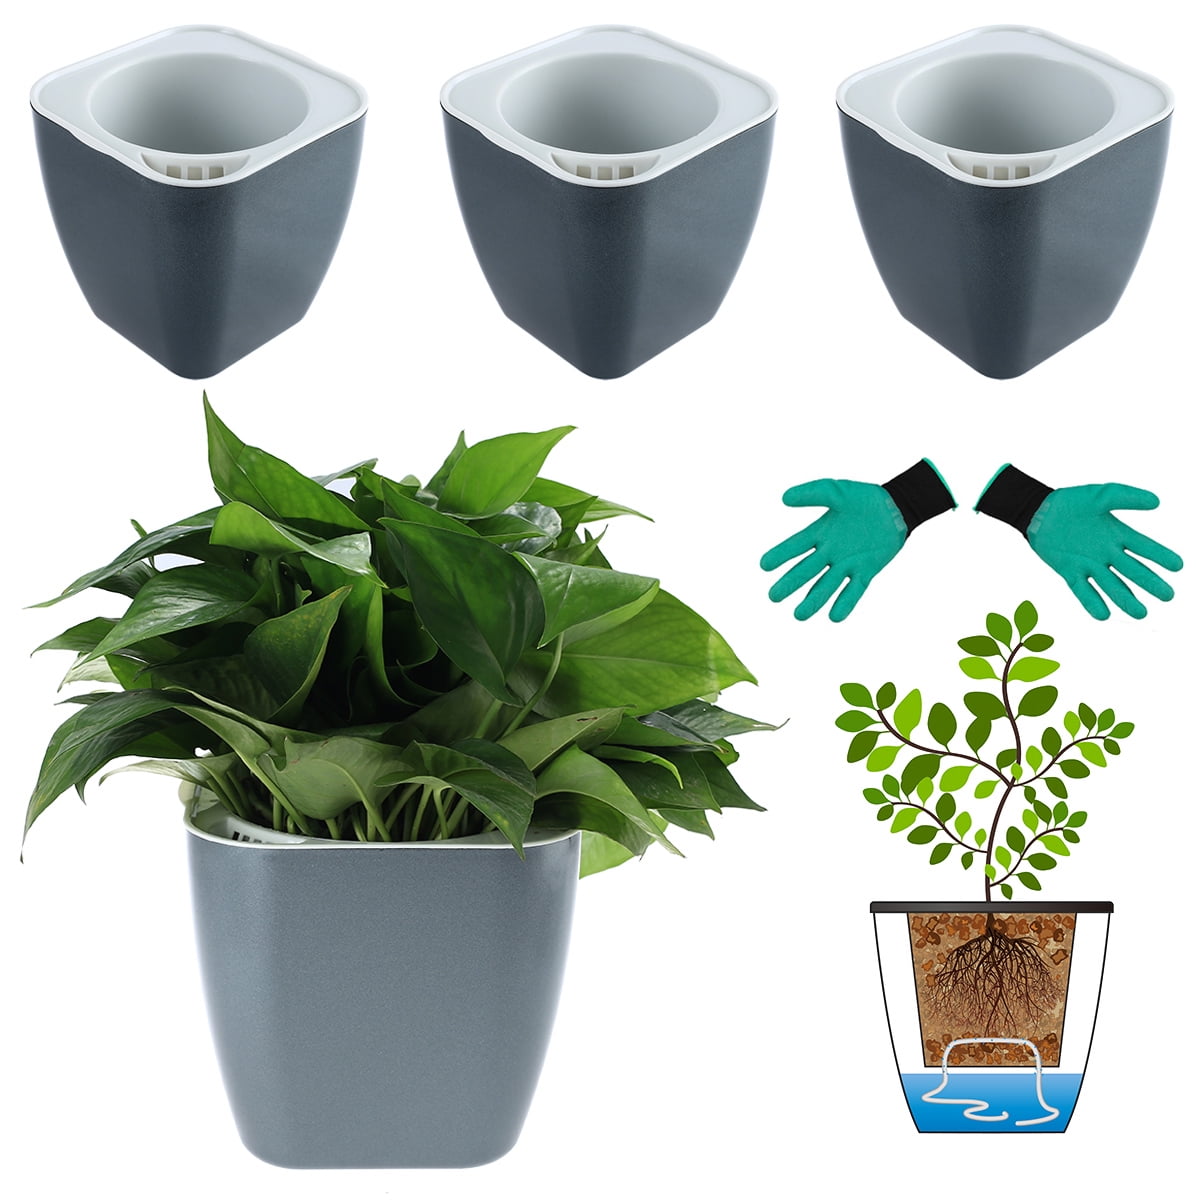 T4U 13CM Self Watering Plastic Planter with Water Level Indicator Pack of 3 Aloe African Violets Herbs Modern Decorative Planter Flower Pot for House Plants Matte White Succulents and More